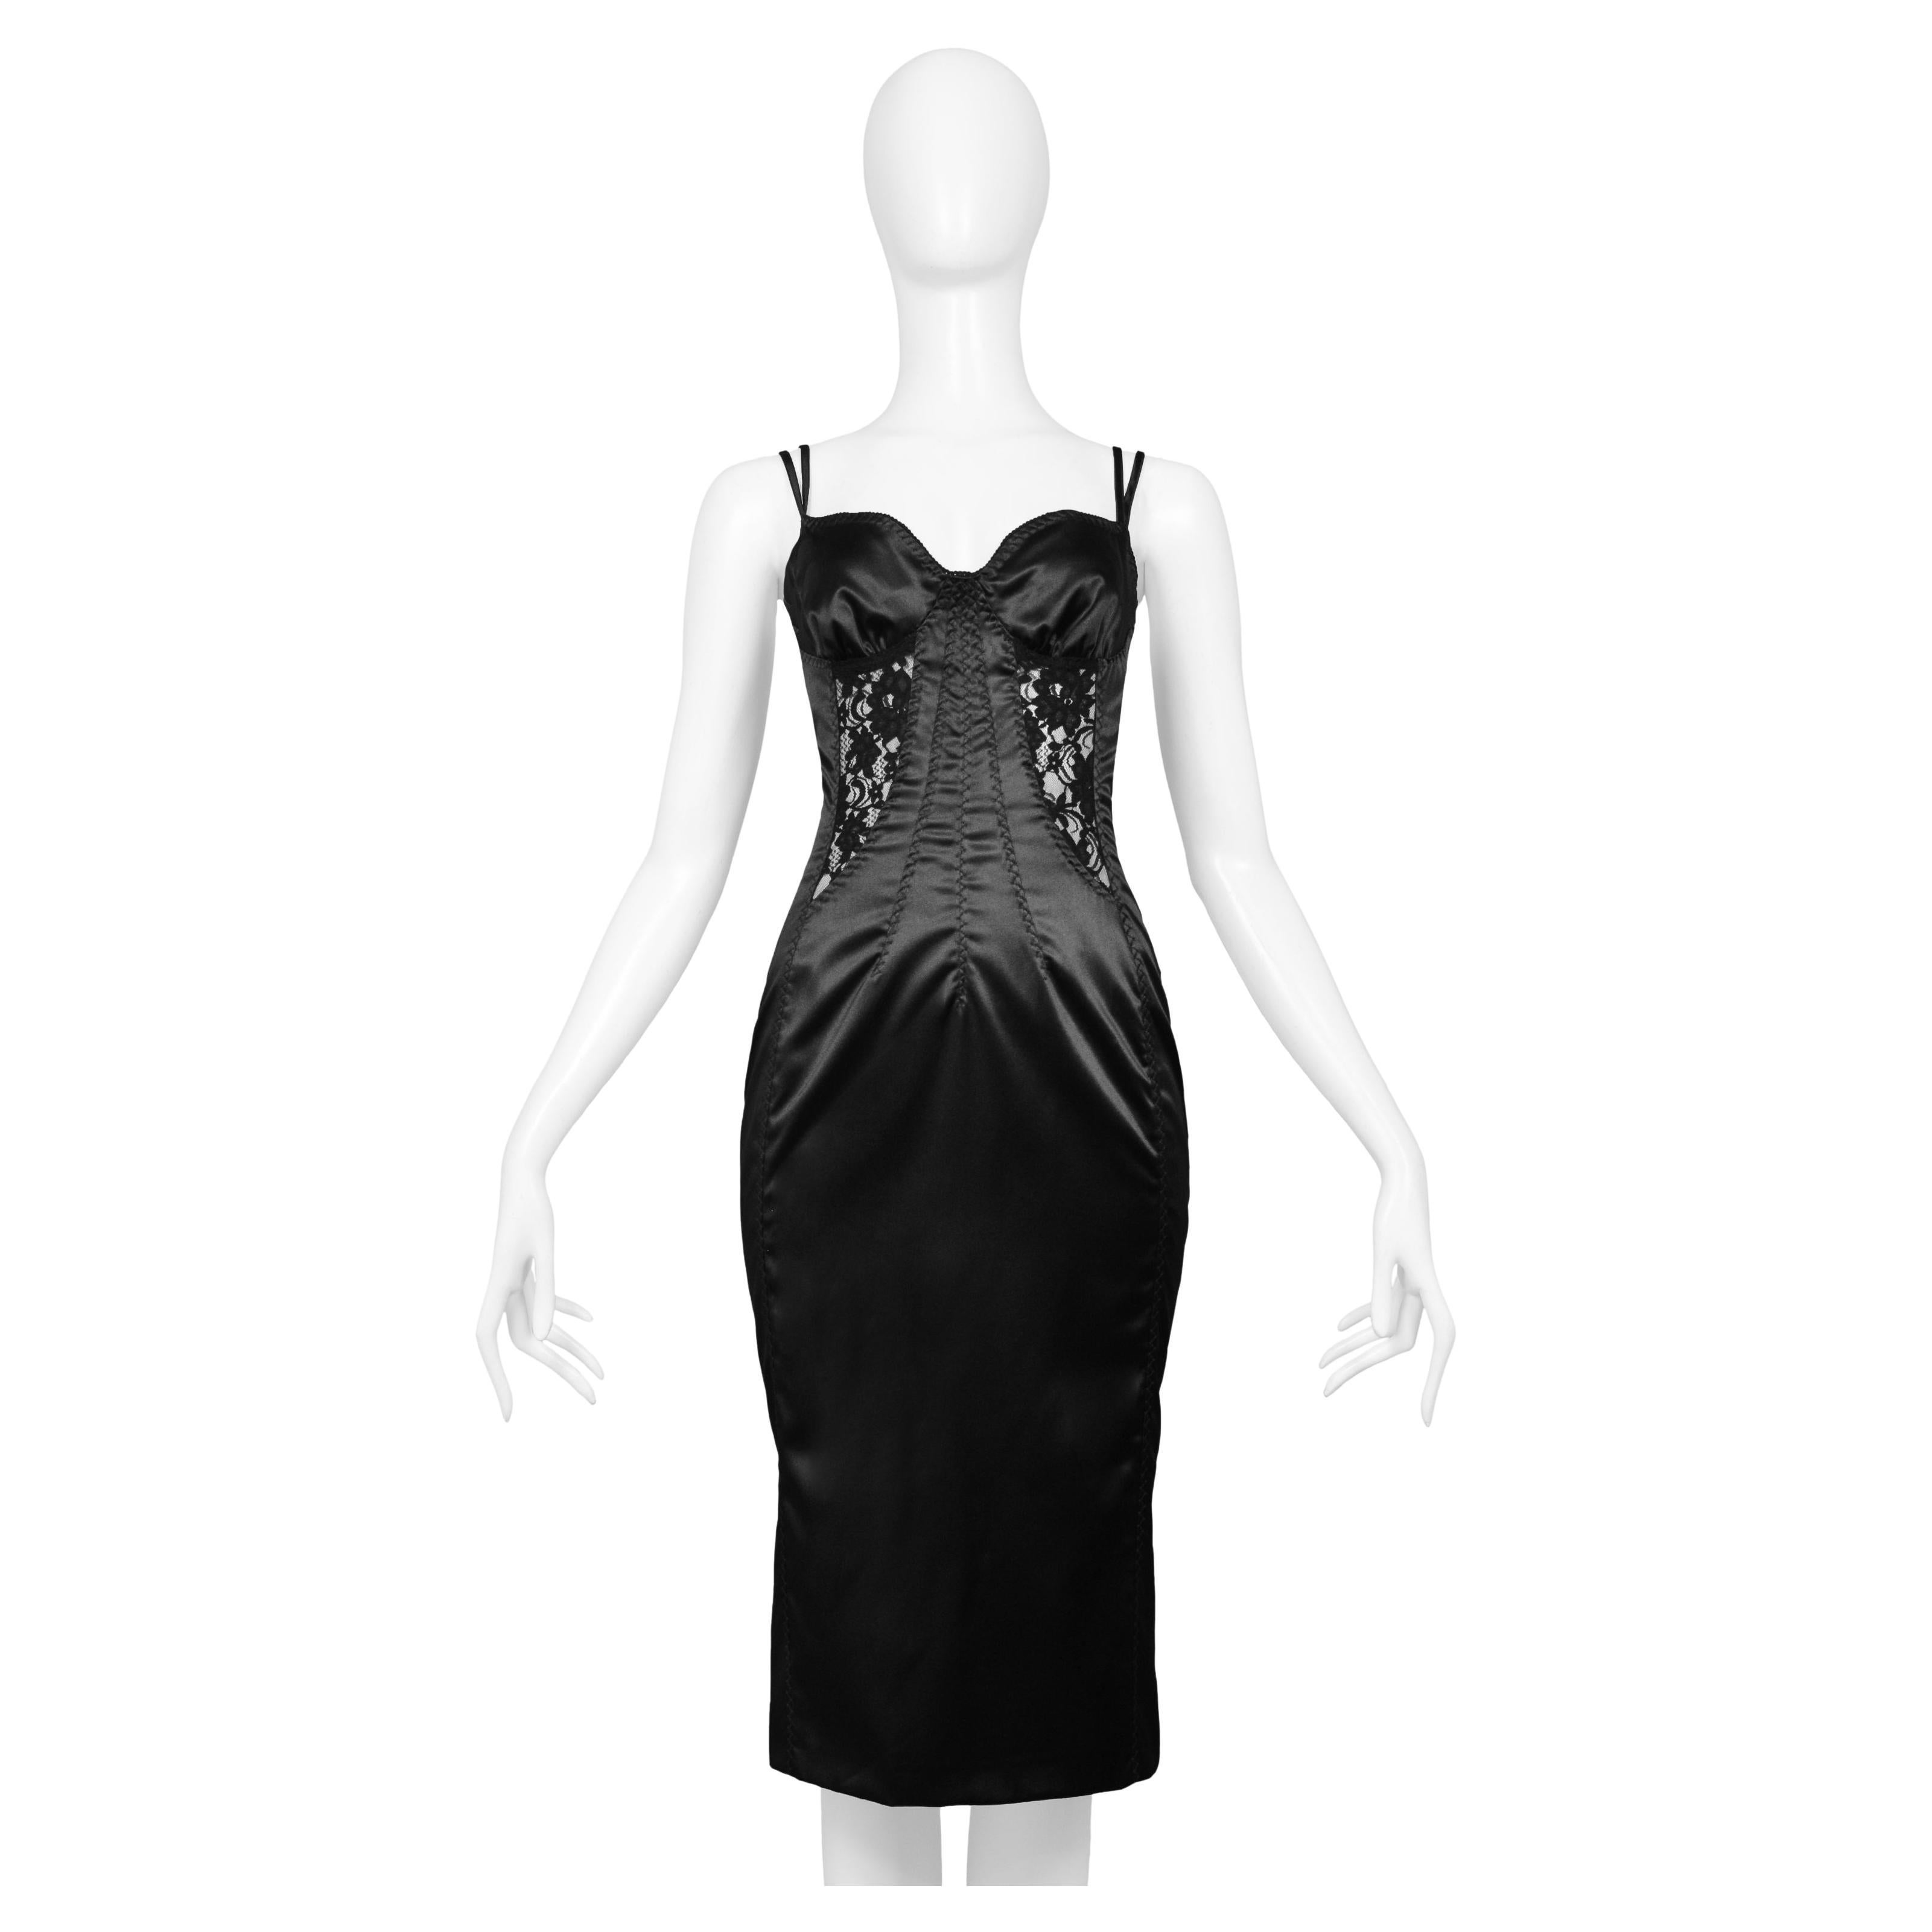 Dolce & Gabbana Black Satin Bodycon Dress with Lace Insets